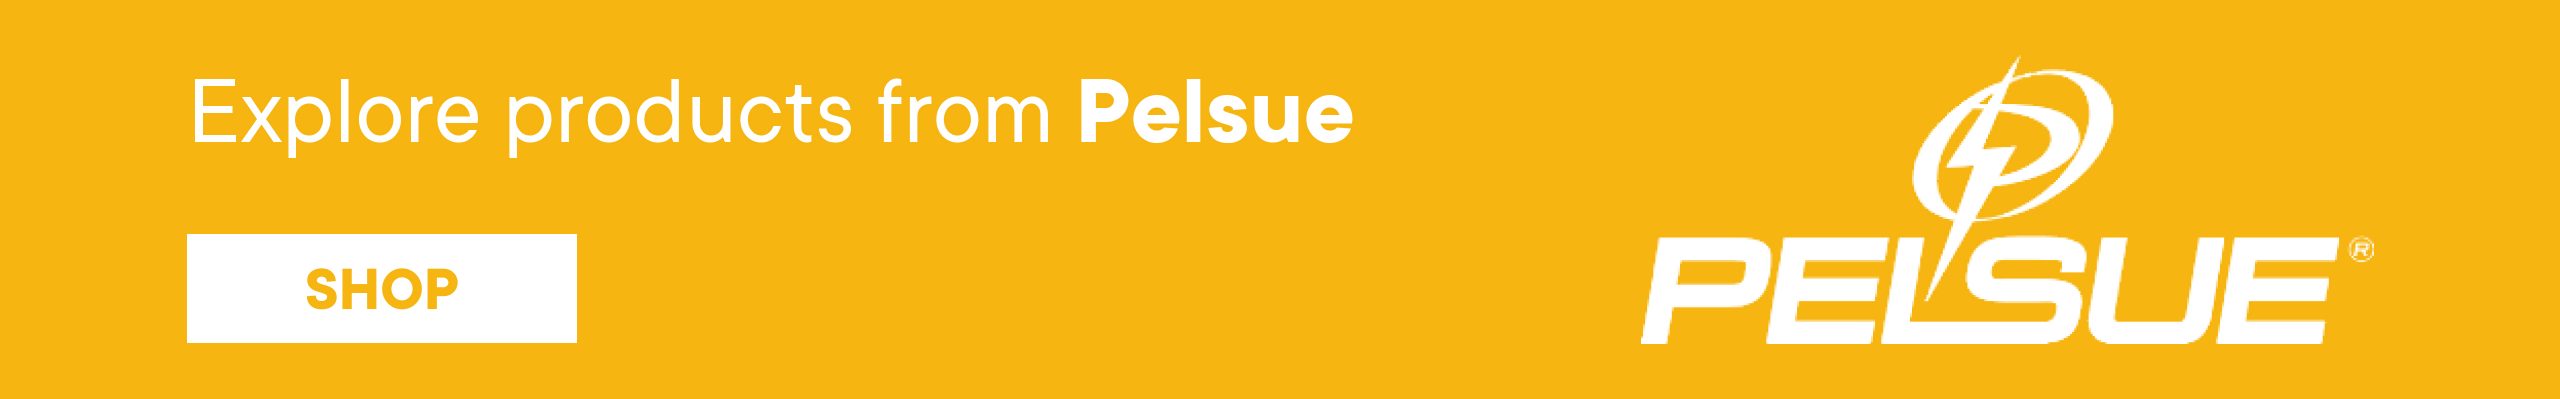 Explore products from Pelsue